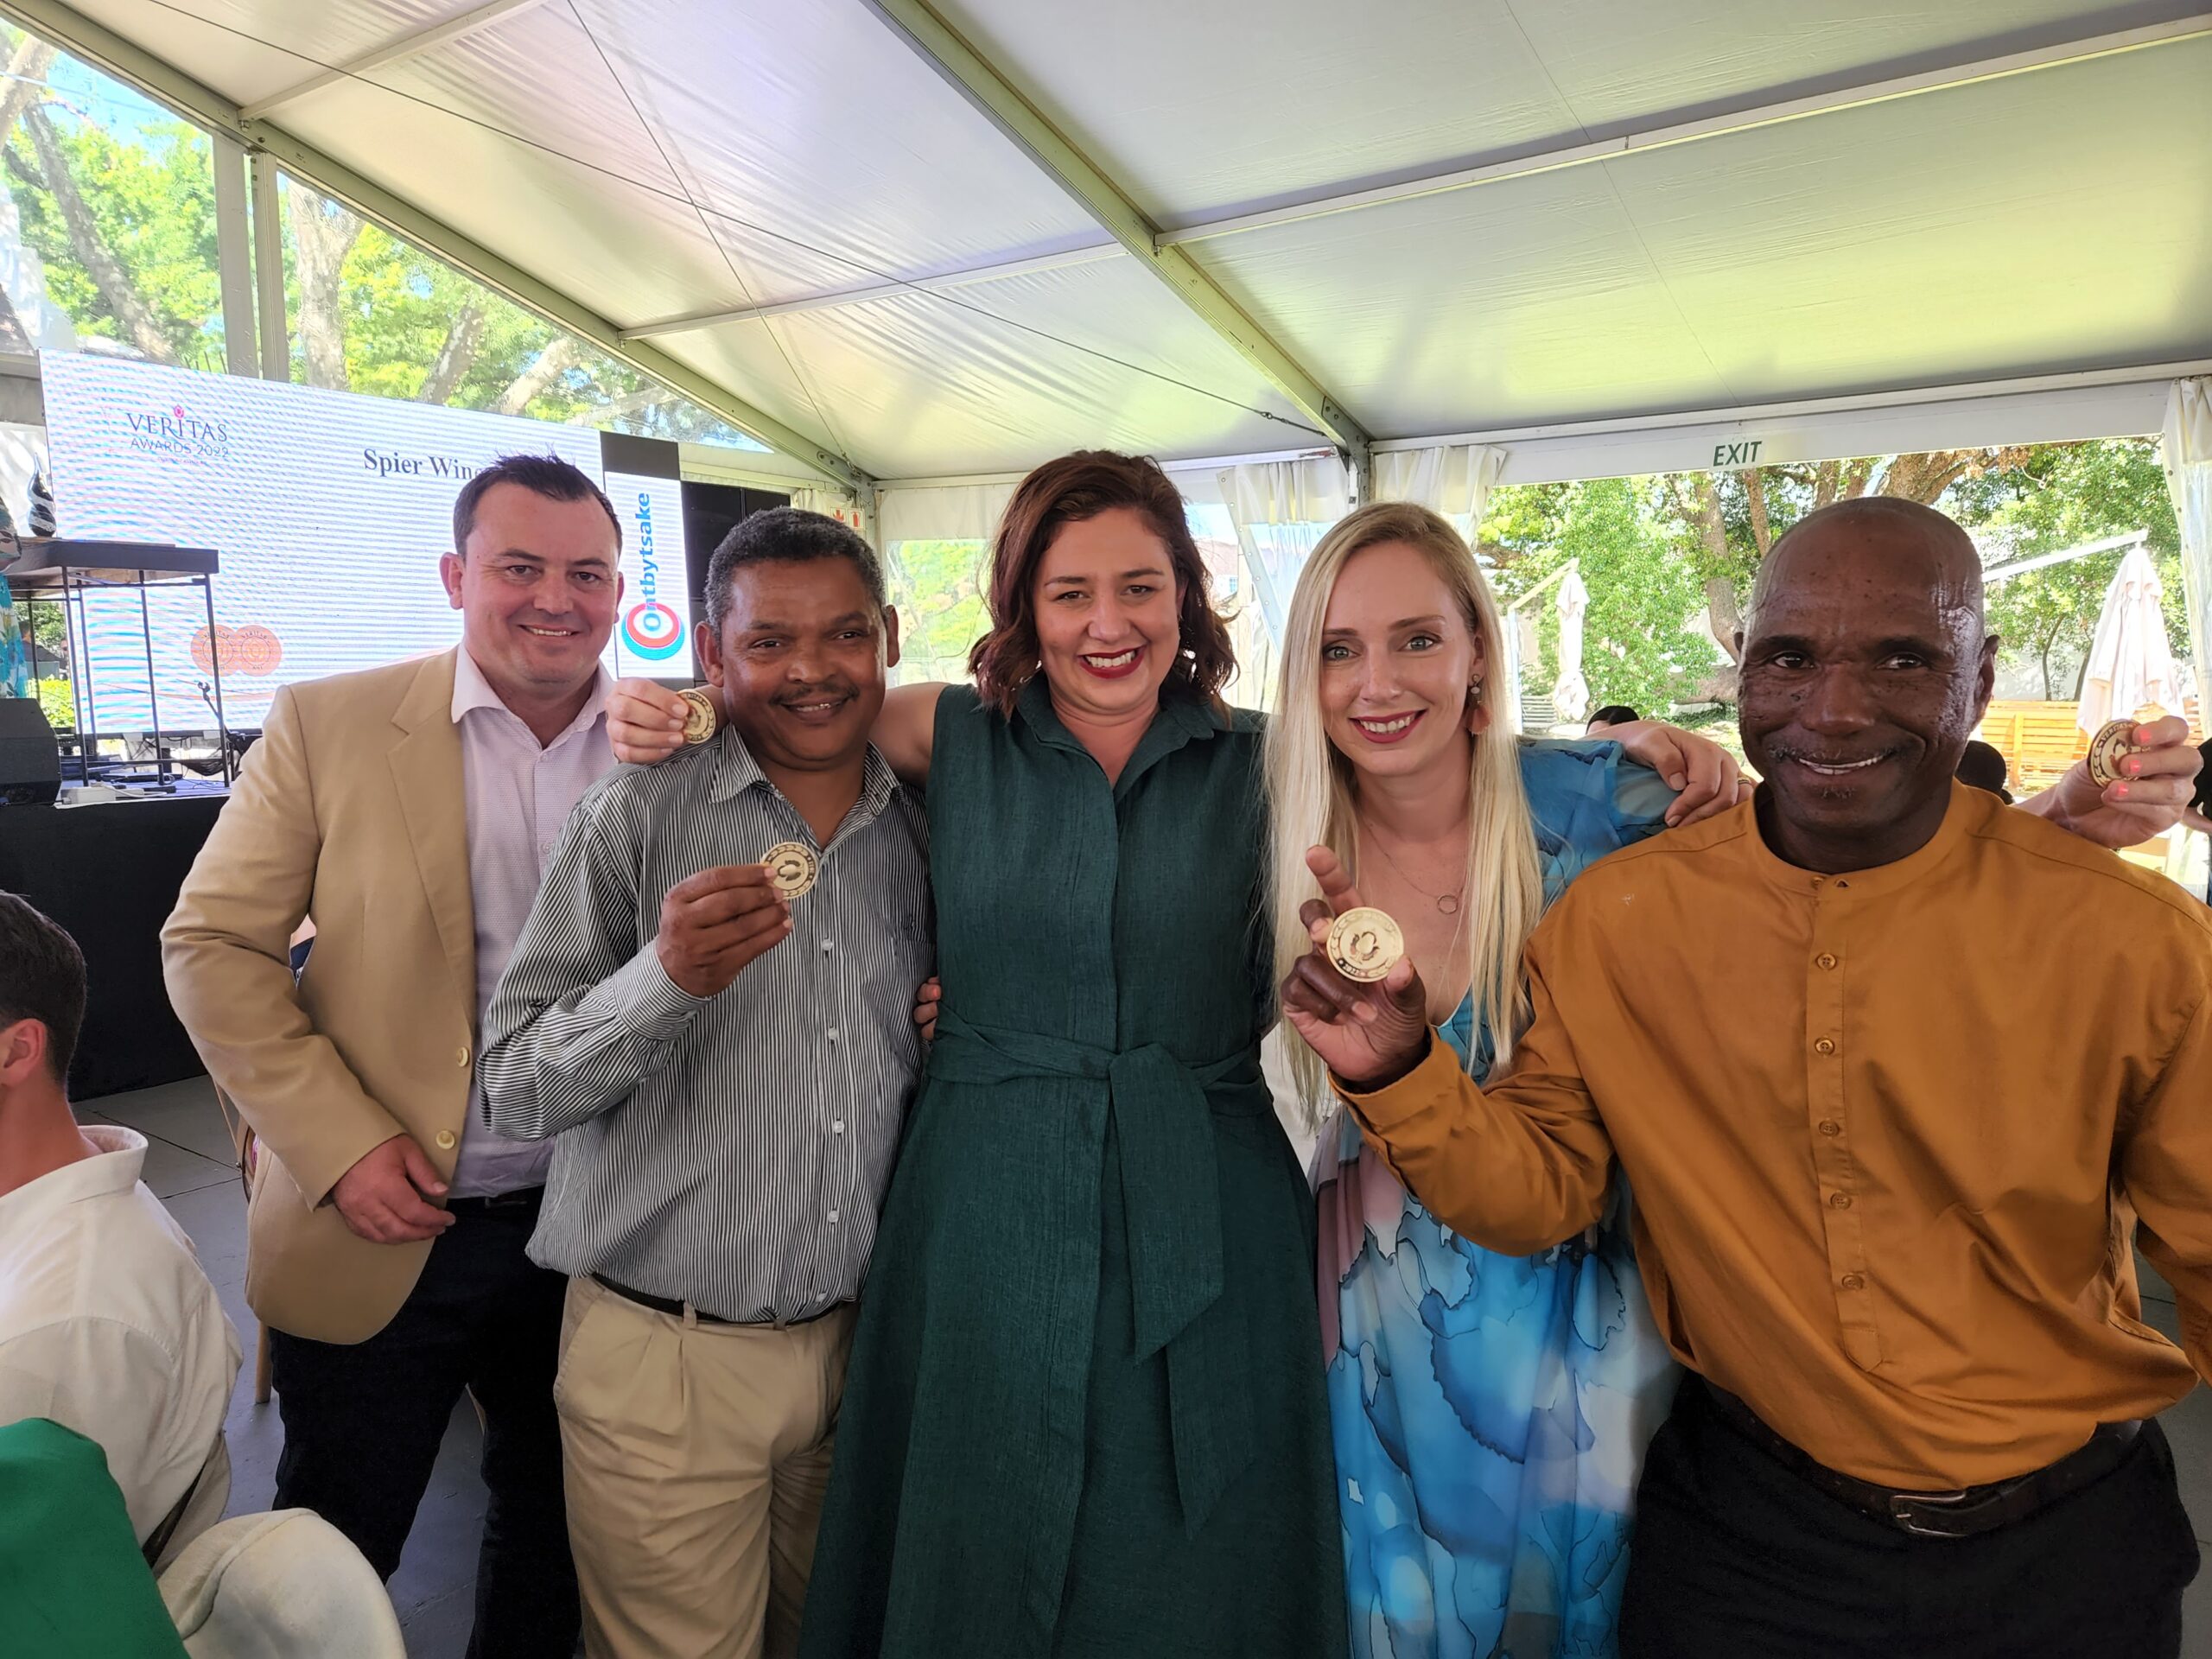 Kleine Zalze Shines At Veritas With Four Double Gold Medals And Best Achiever Award photo